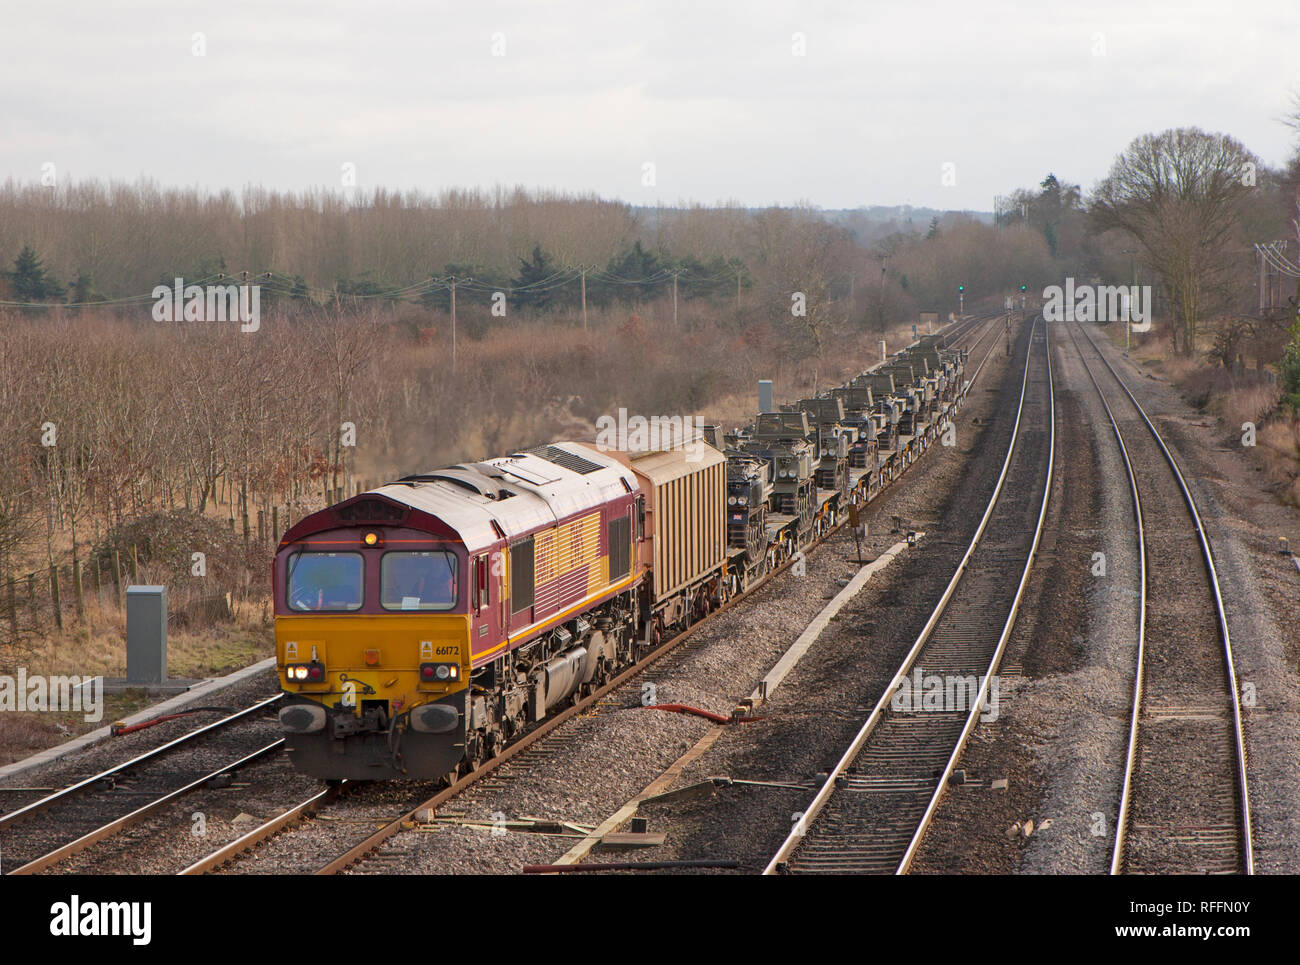 A class 66 diesel locomotive number 66172 working an MOD train loaded with military vehicles at Lower Basildon on the Great Western Mainline. Stock Photo